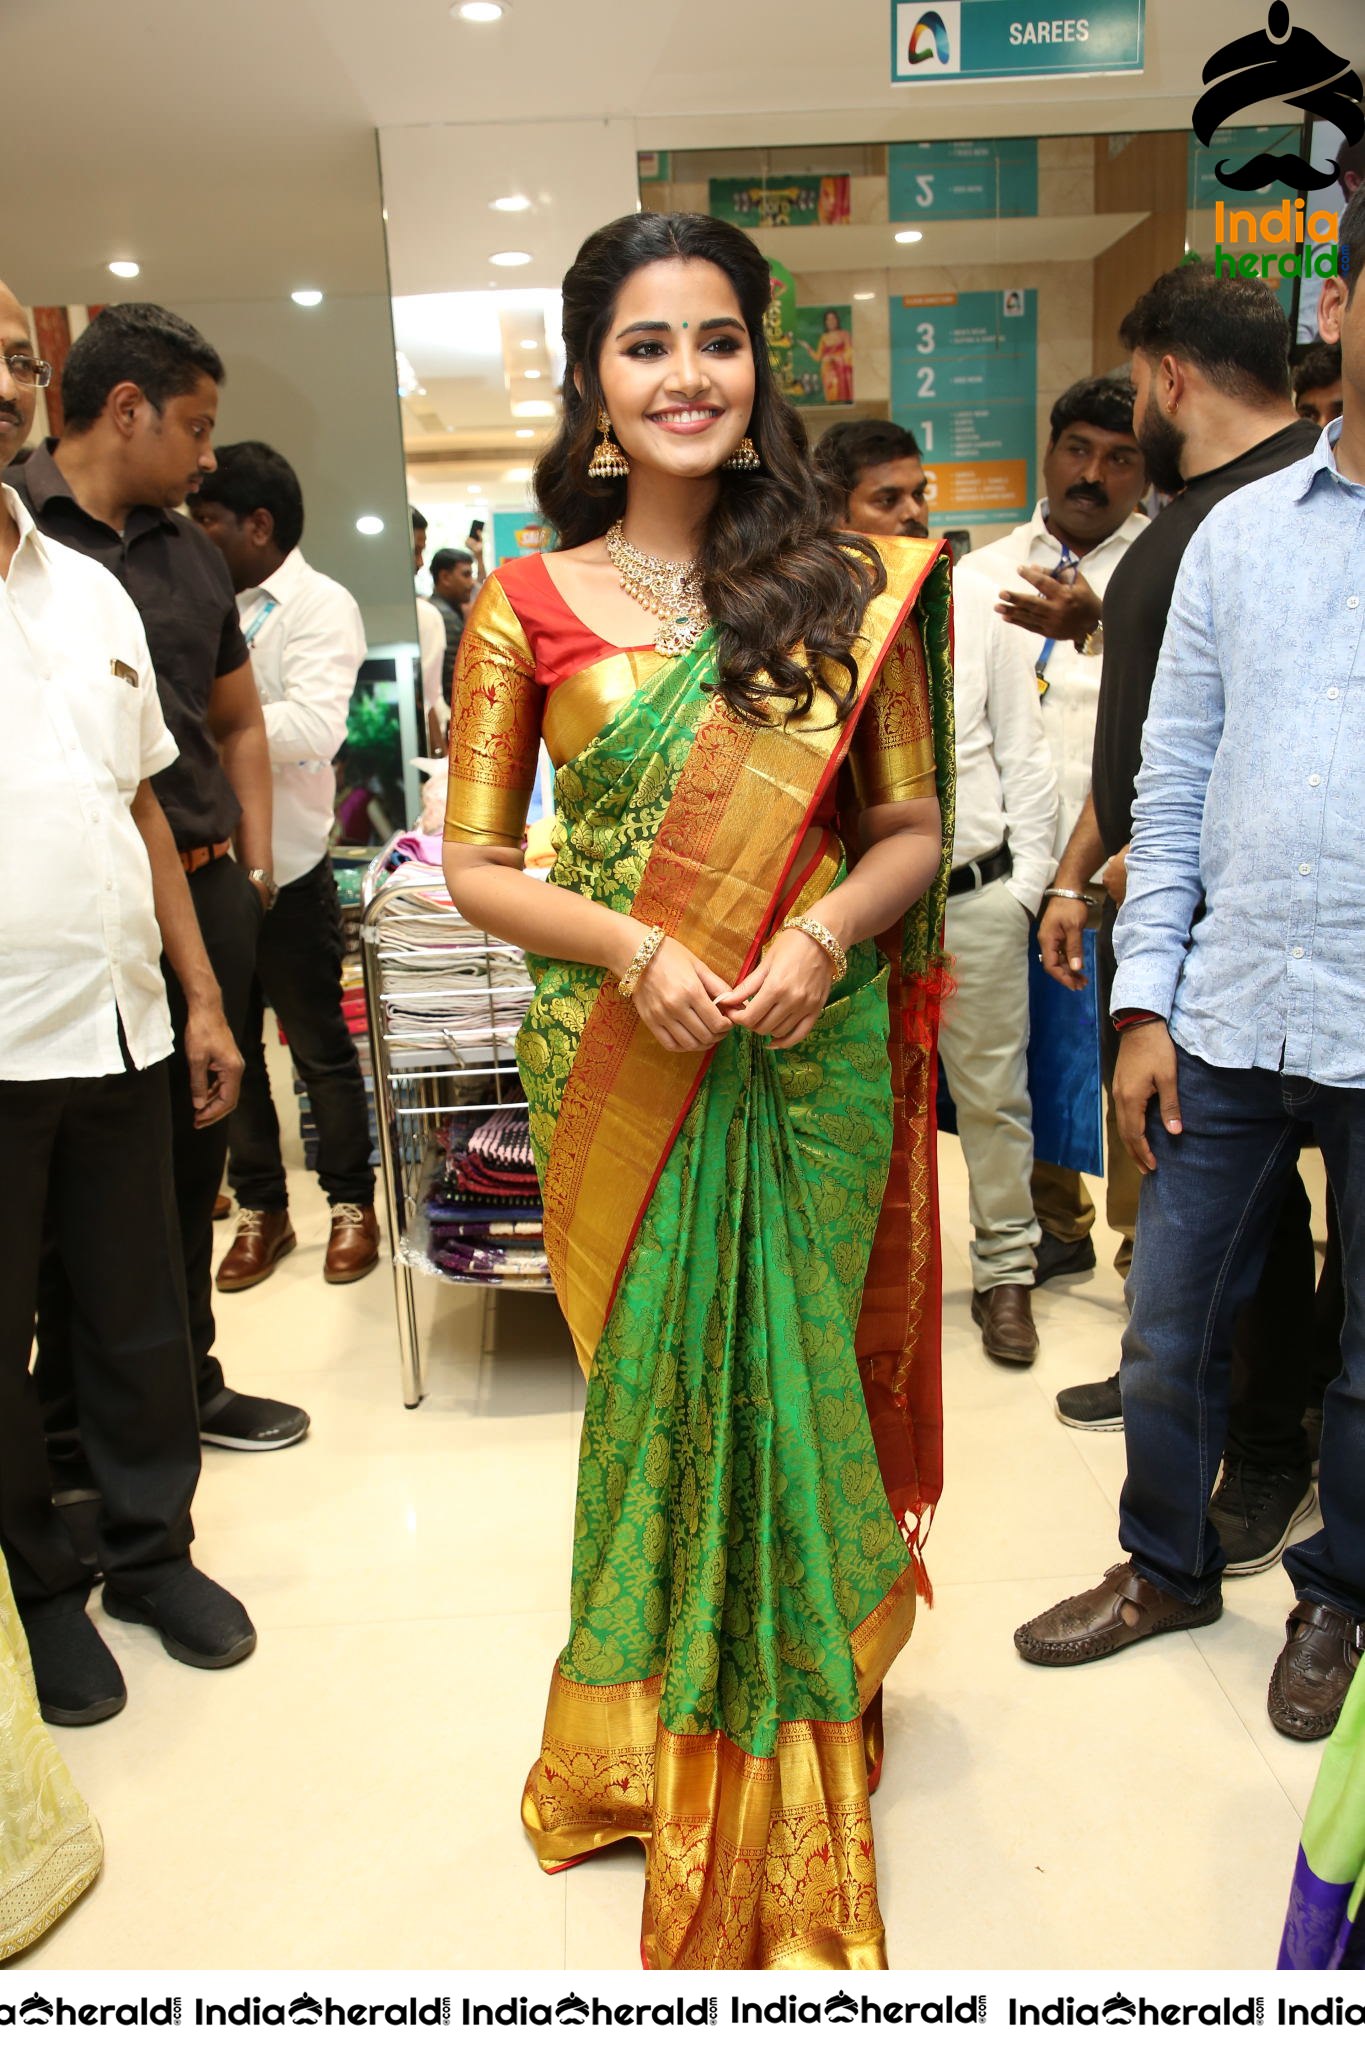 Anutex Shopping Mall Grand Festival Prizes And Collection Launched By Actress Anupama Parameswaran Set 5